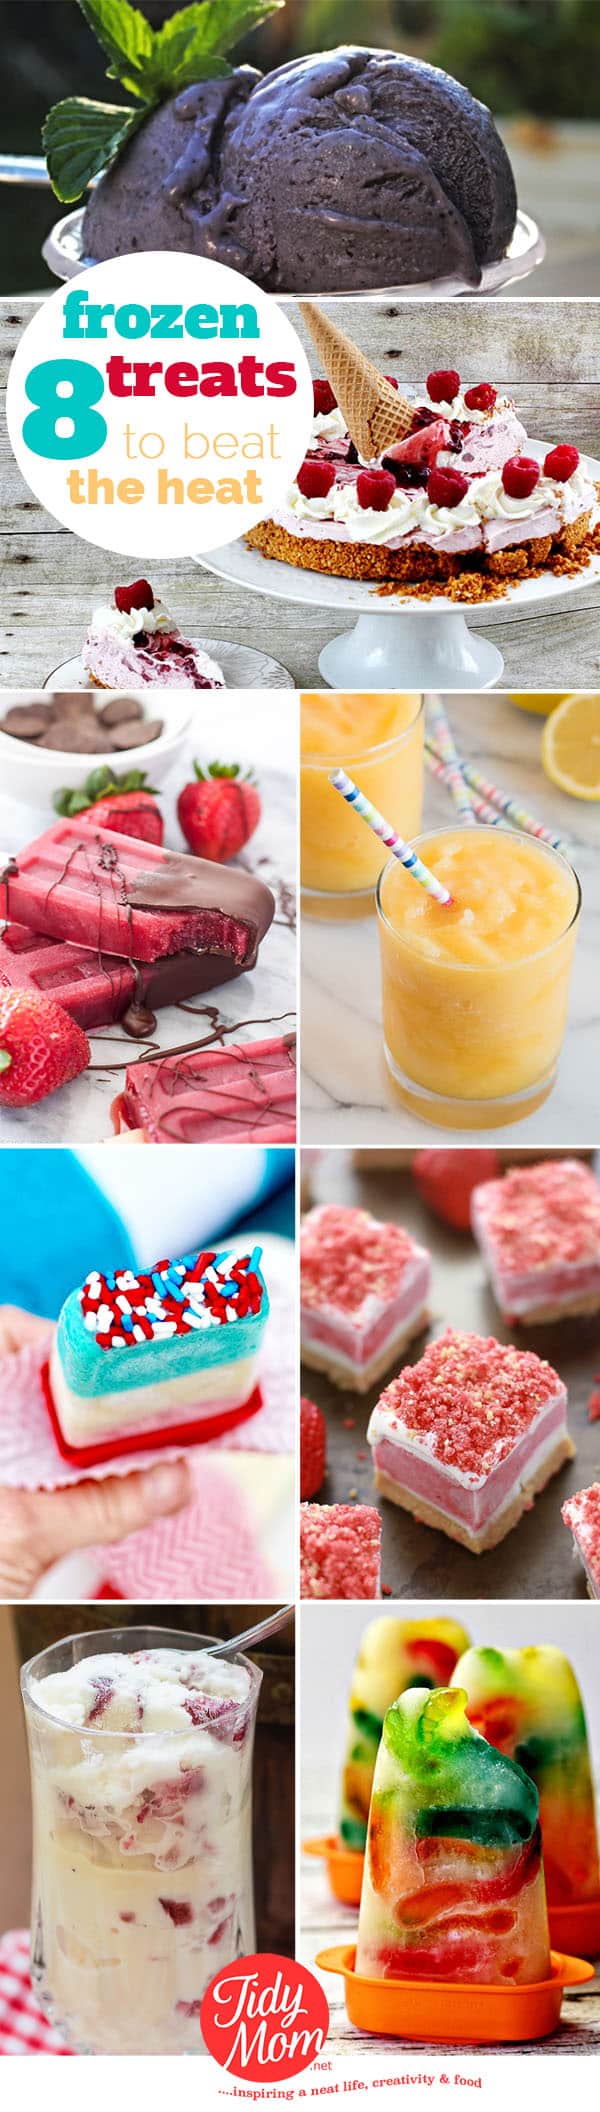 8 FROZEN TREATS TO BEAT THE HEAT THIS SUMMER! at TidyMom.net8 FROZEN TREATS TO BEAT THE HEAT THIS SUMMER! at TidyMom.net